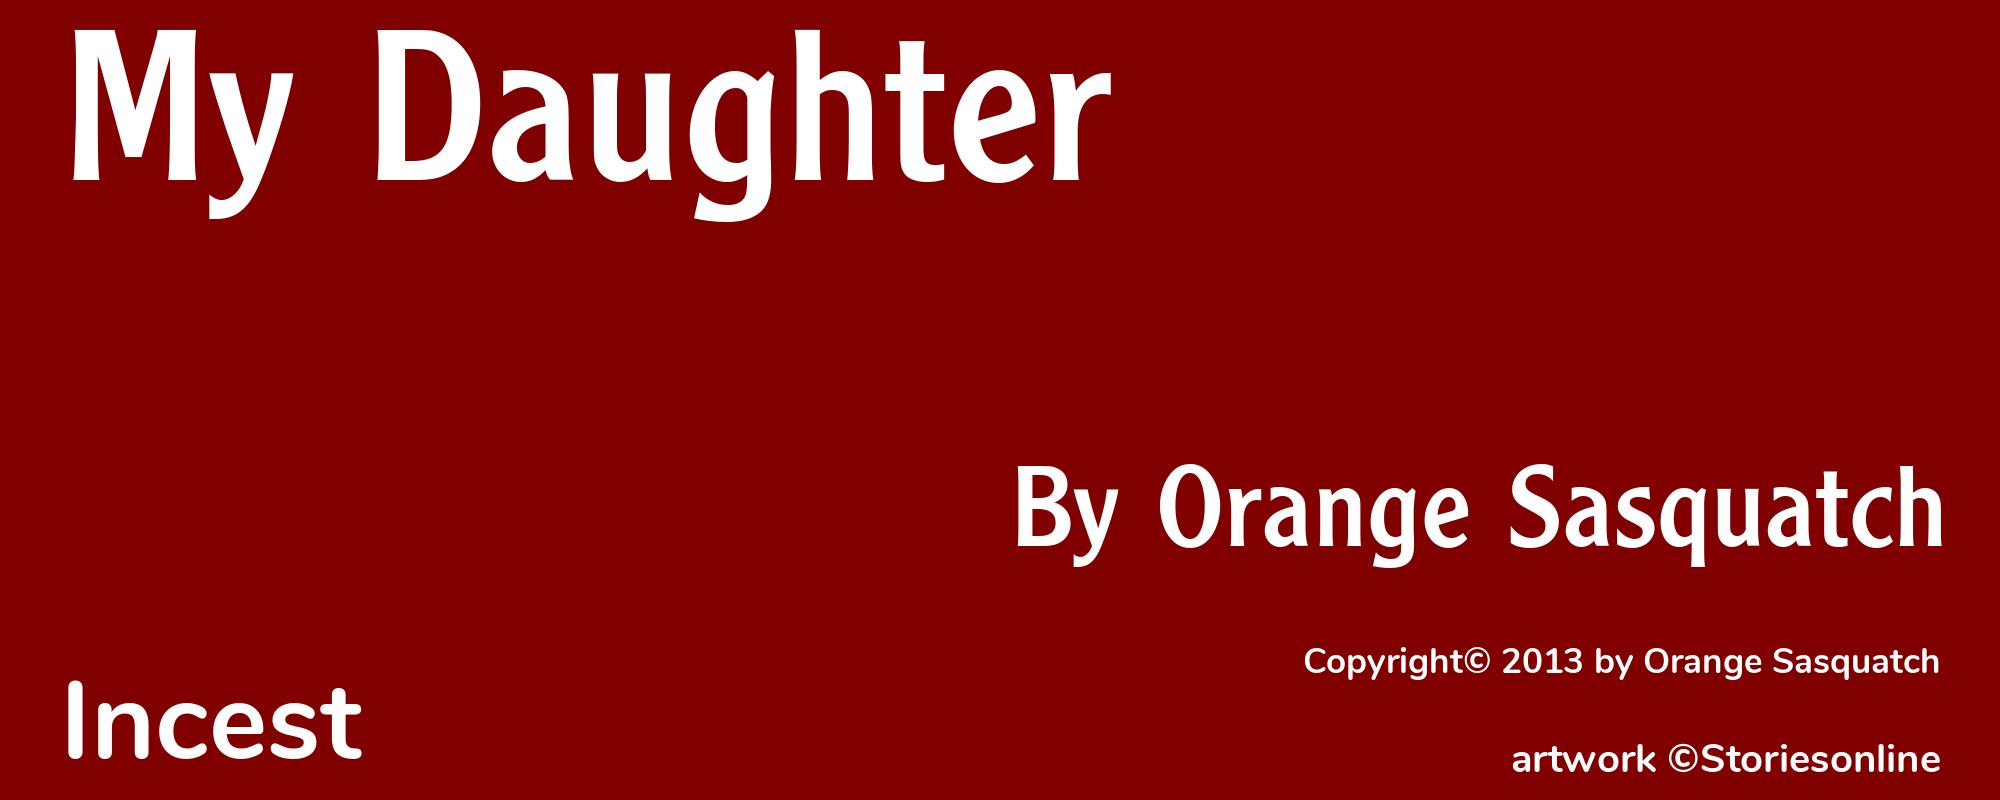 My Daughter - Cover